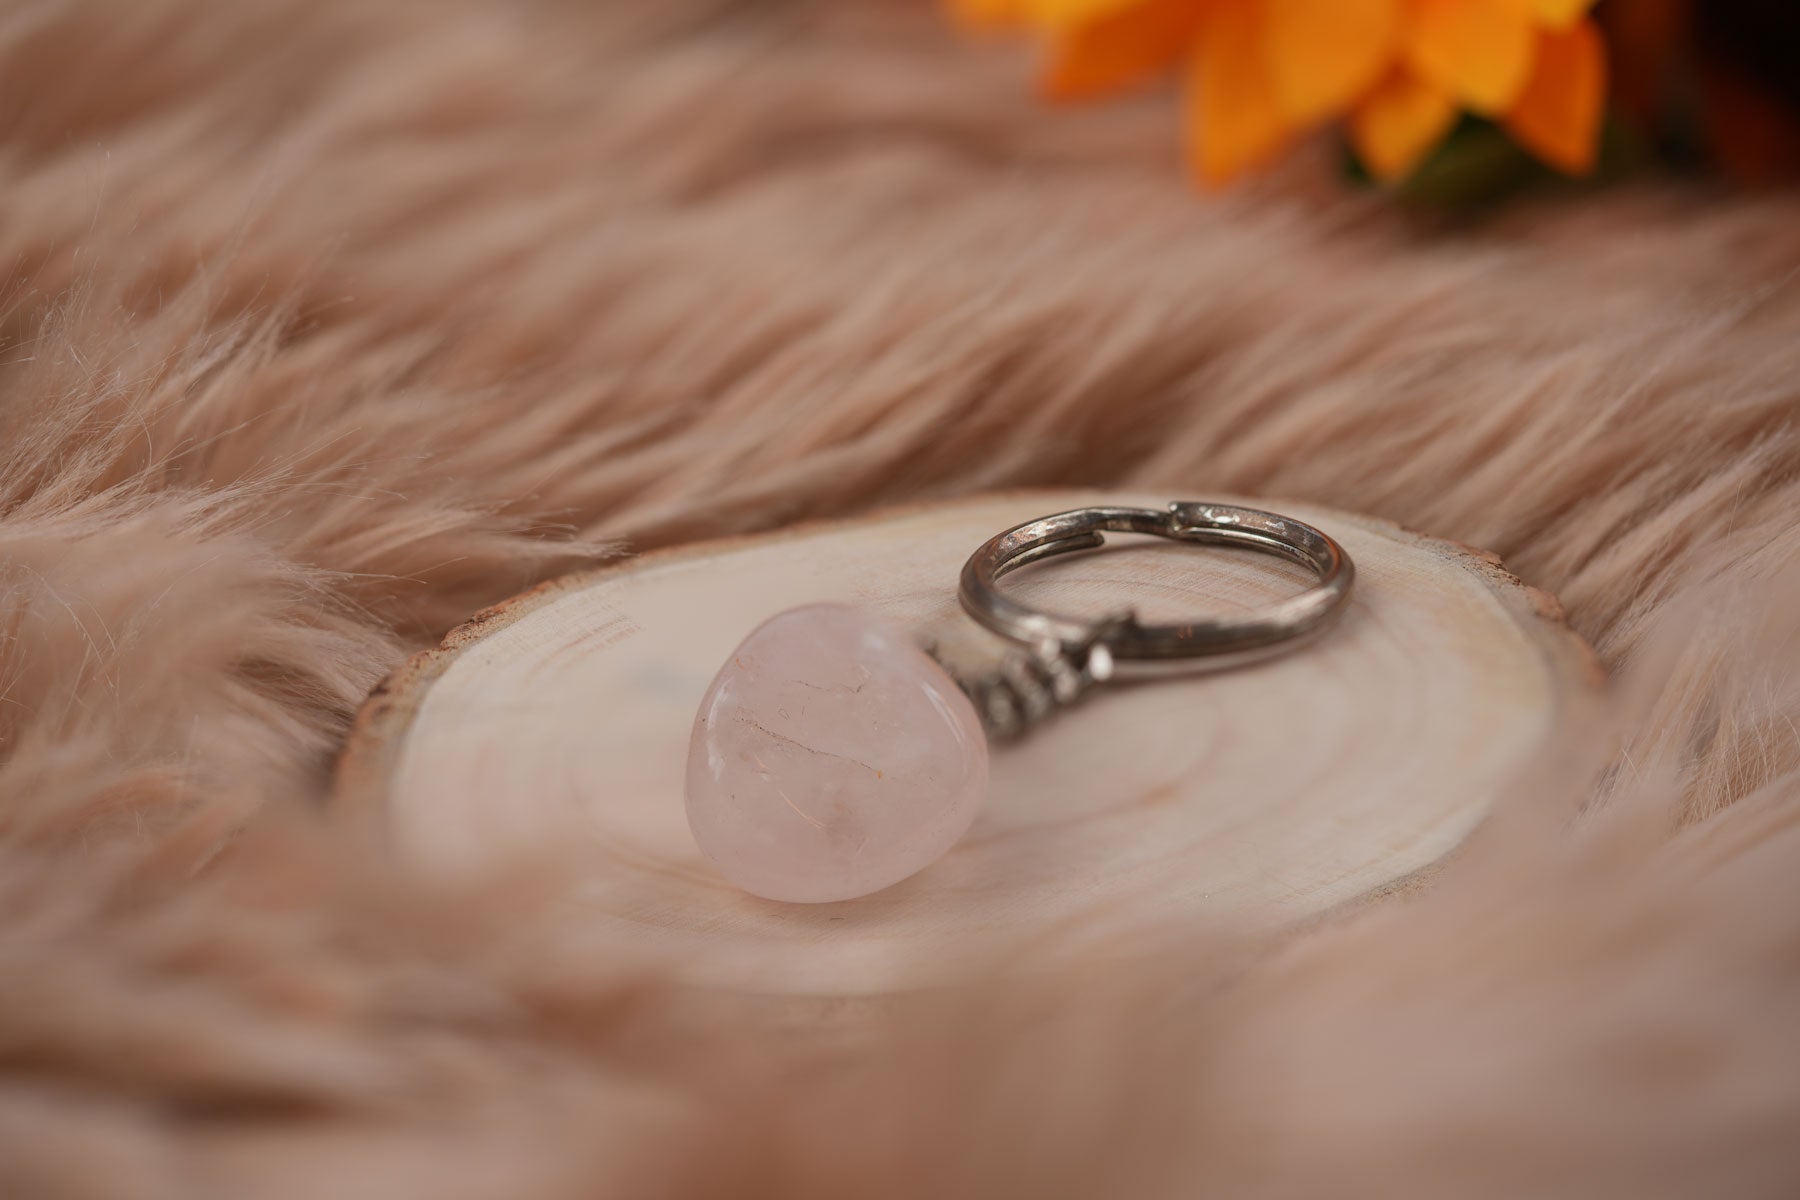 Rose Quartz Key Chain : The Stone of Love and HarmonyThe Last Monk